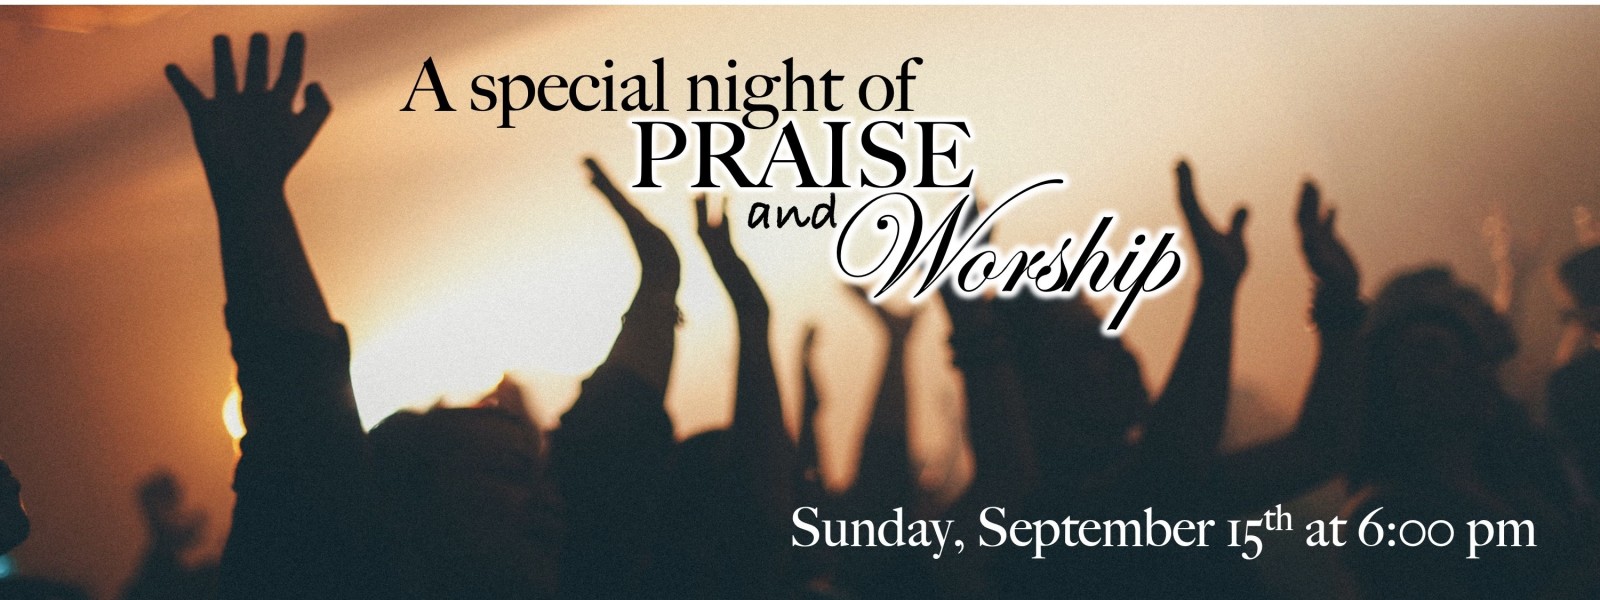 Join us on September 15th for a Worship Concert at Calvary Chapel Naples at 6pm.